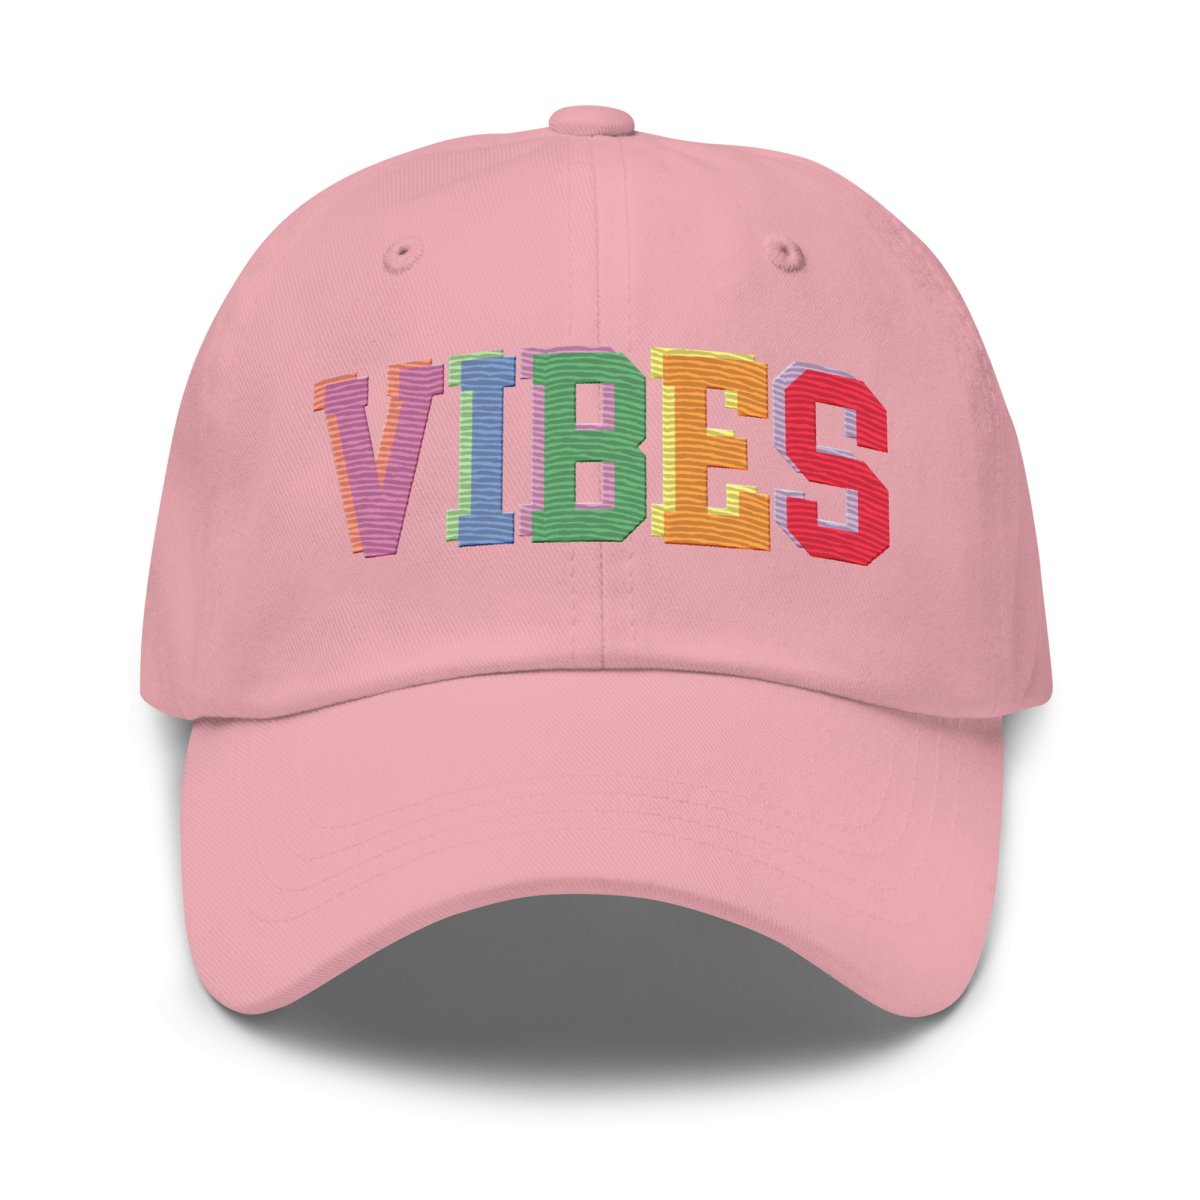 'Vibes' Embroidered Hat - United Monograms